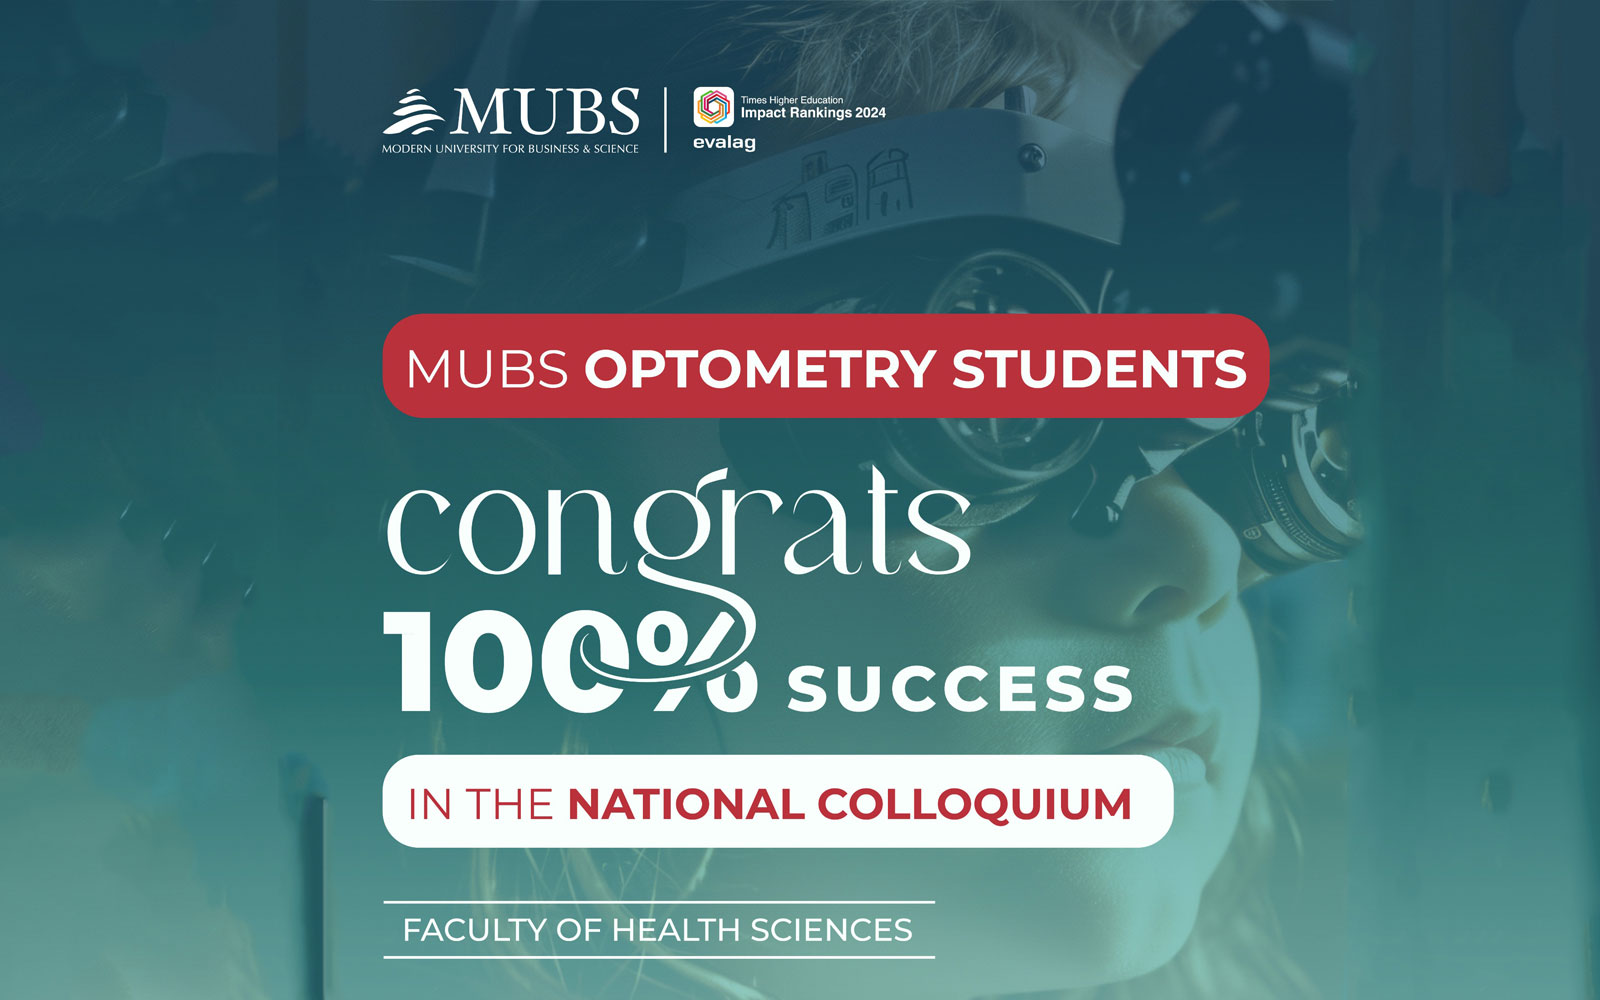 MUBS Optometry Students Achieve 100% Success in Lebanon’s First Colloquium Exam